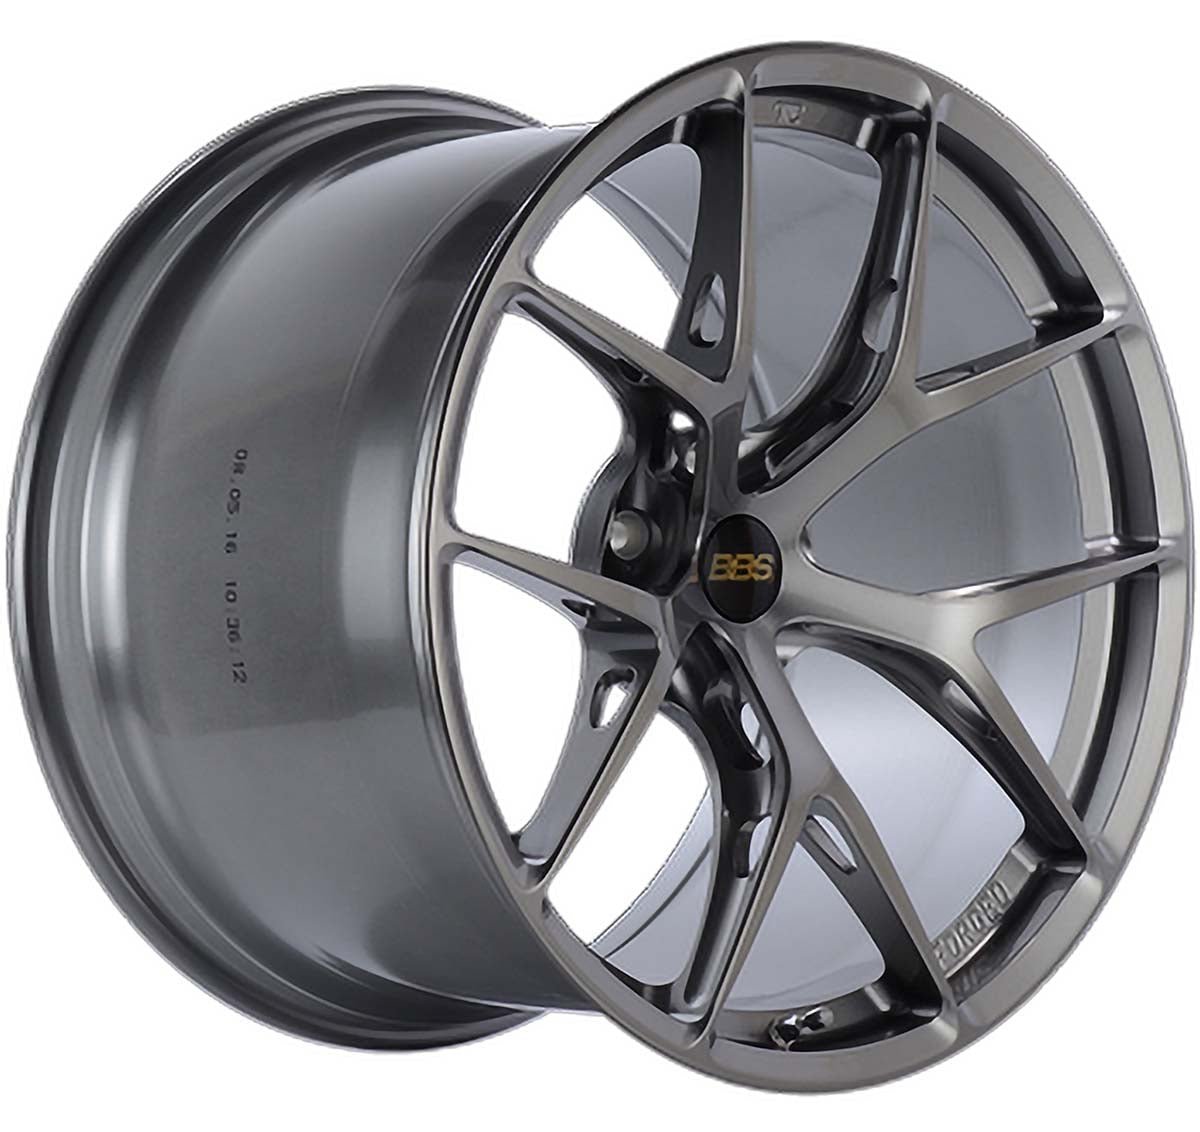 BBS FI-R Forged Line Exclusive Wheels Complete Wheel Package Audi R8 - Competition Motorsport